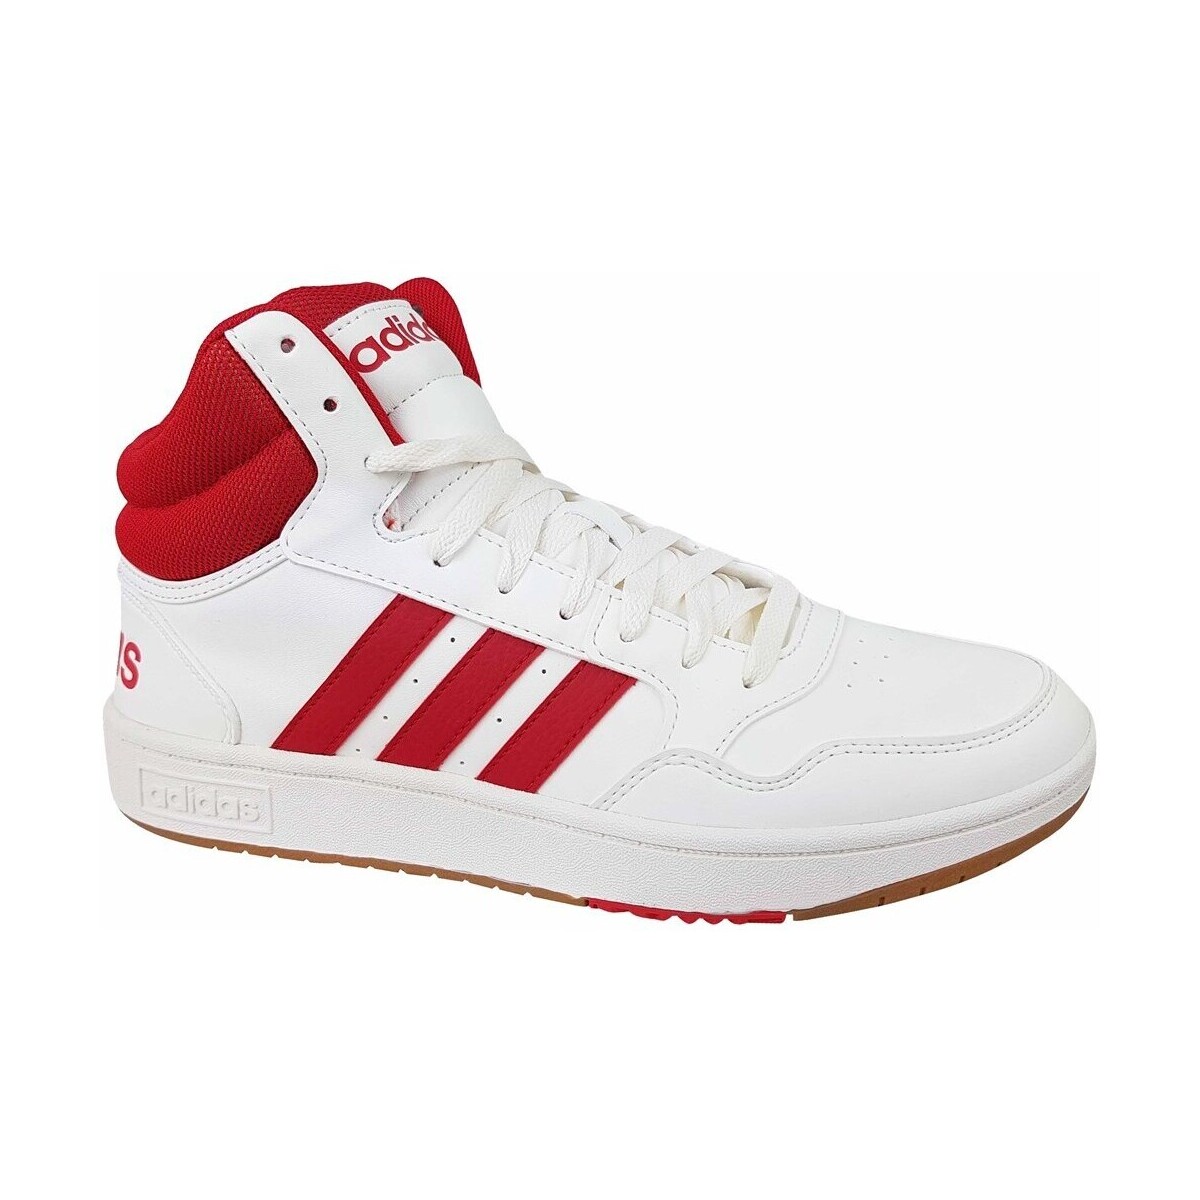 Adidas Hoops 3.0 Mid White